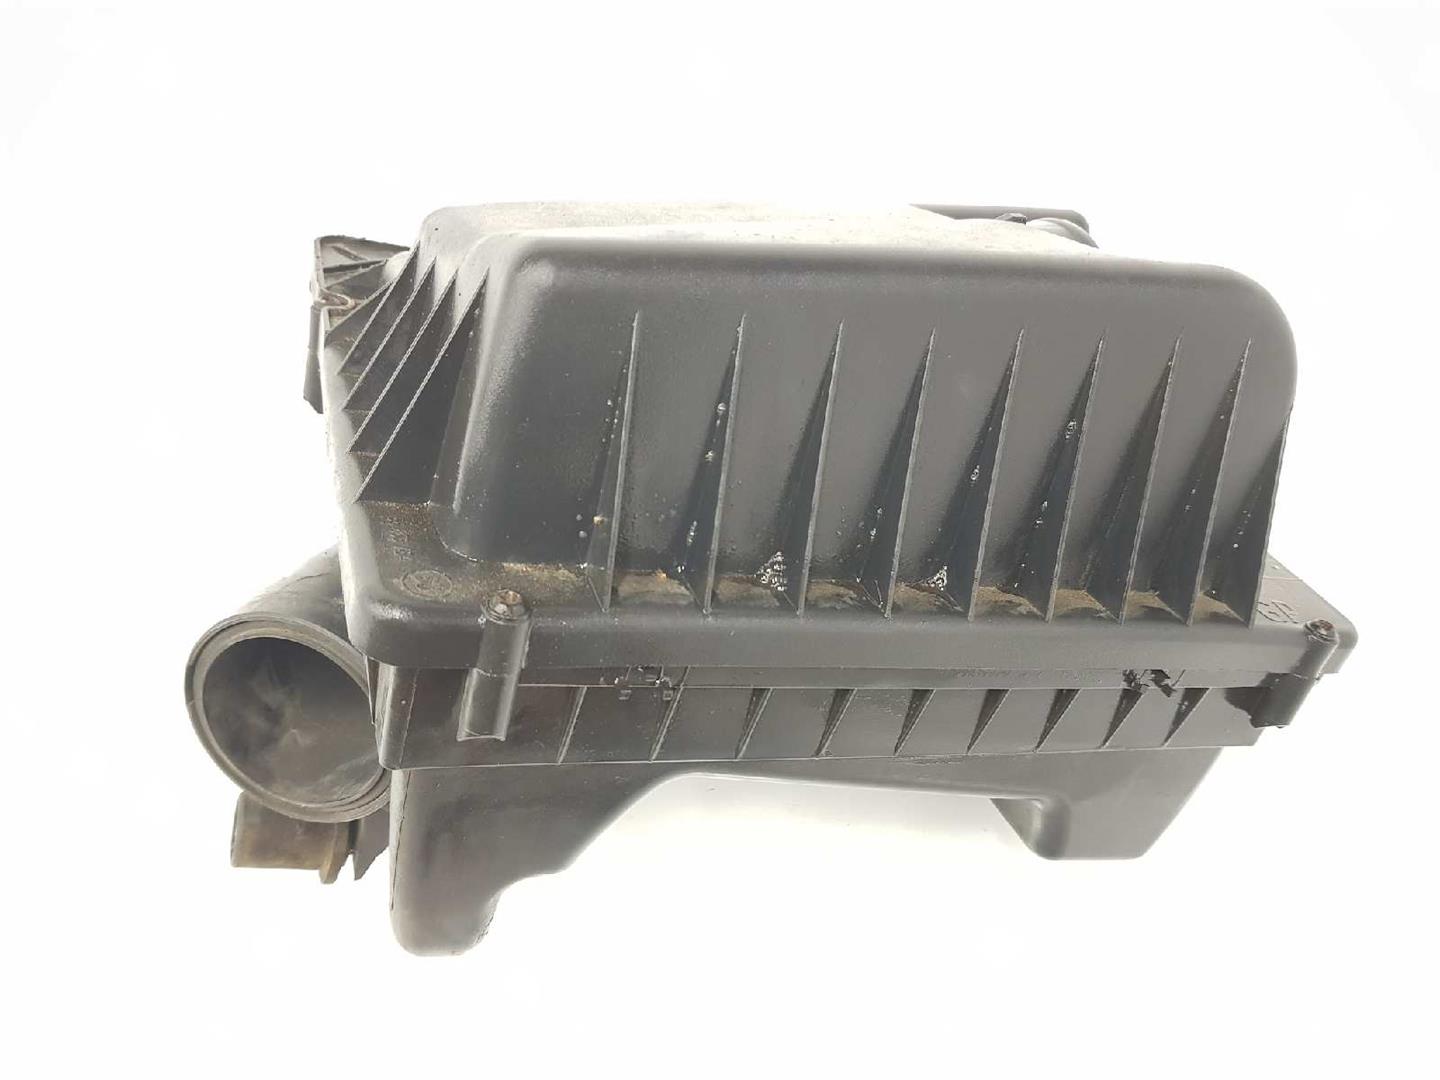 OPEL Astra J (2009-2020) Other Engine Compartment Parts 13271059, 4614485911 19719439